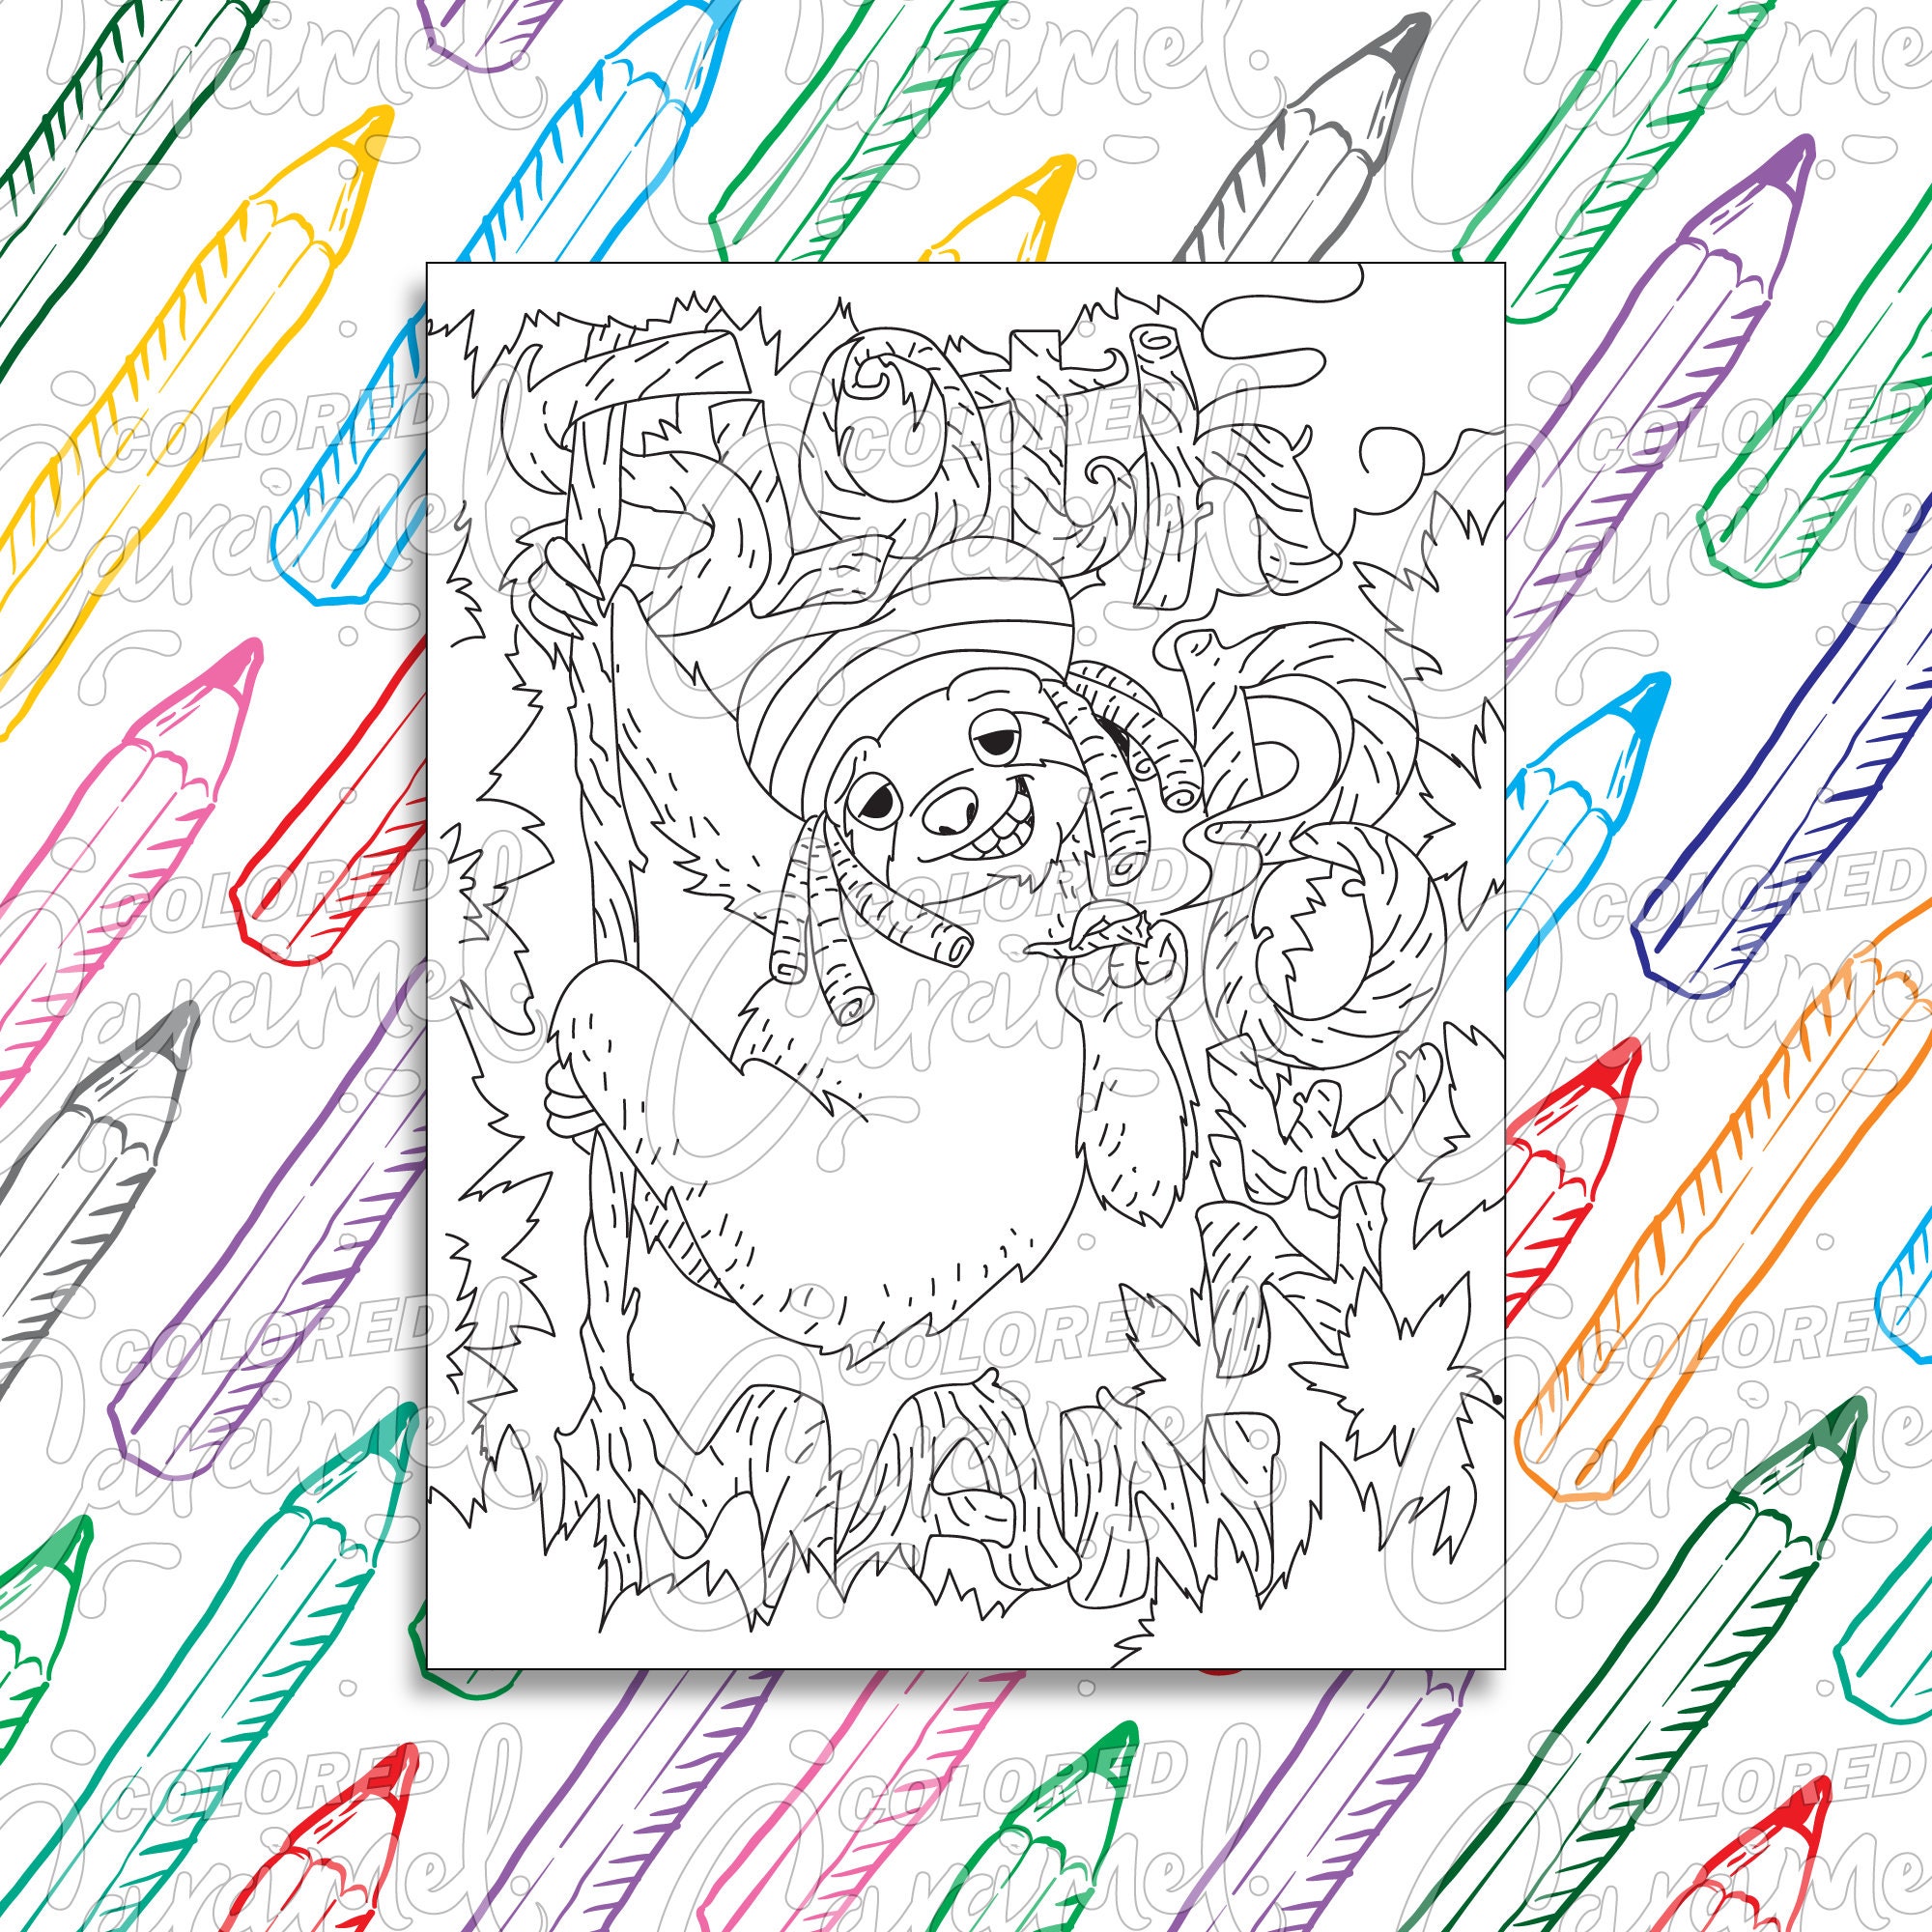 Stoner Coloring Page Digital Download PDF, Trippy, Funny and Cool Monkey Smoking Weed, Printable Psychedelic Drawing & Illustration